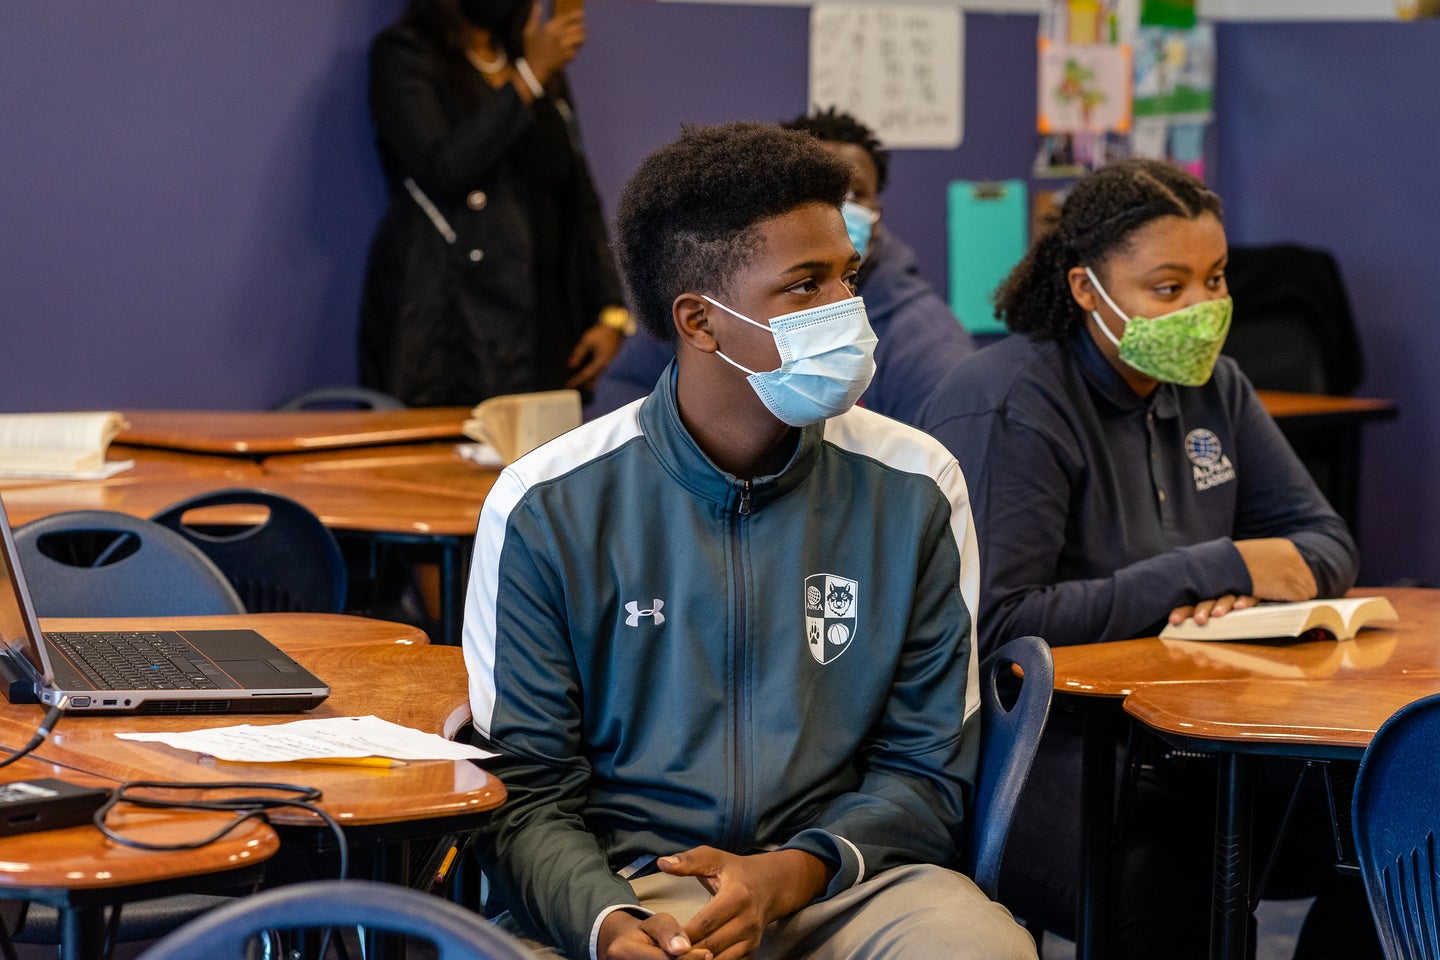 Black students in masks and track suits at desks